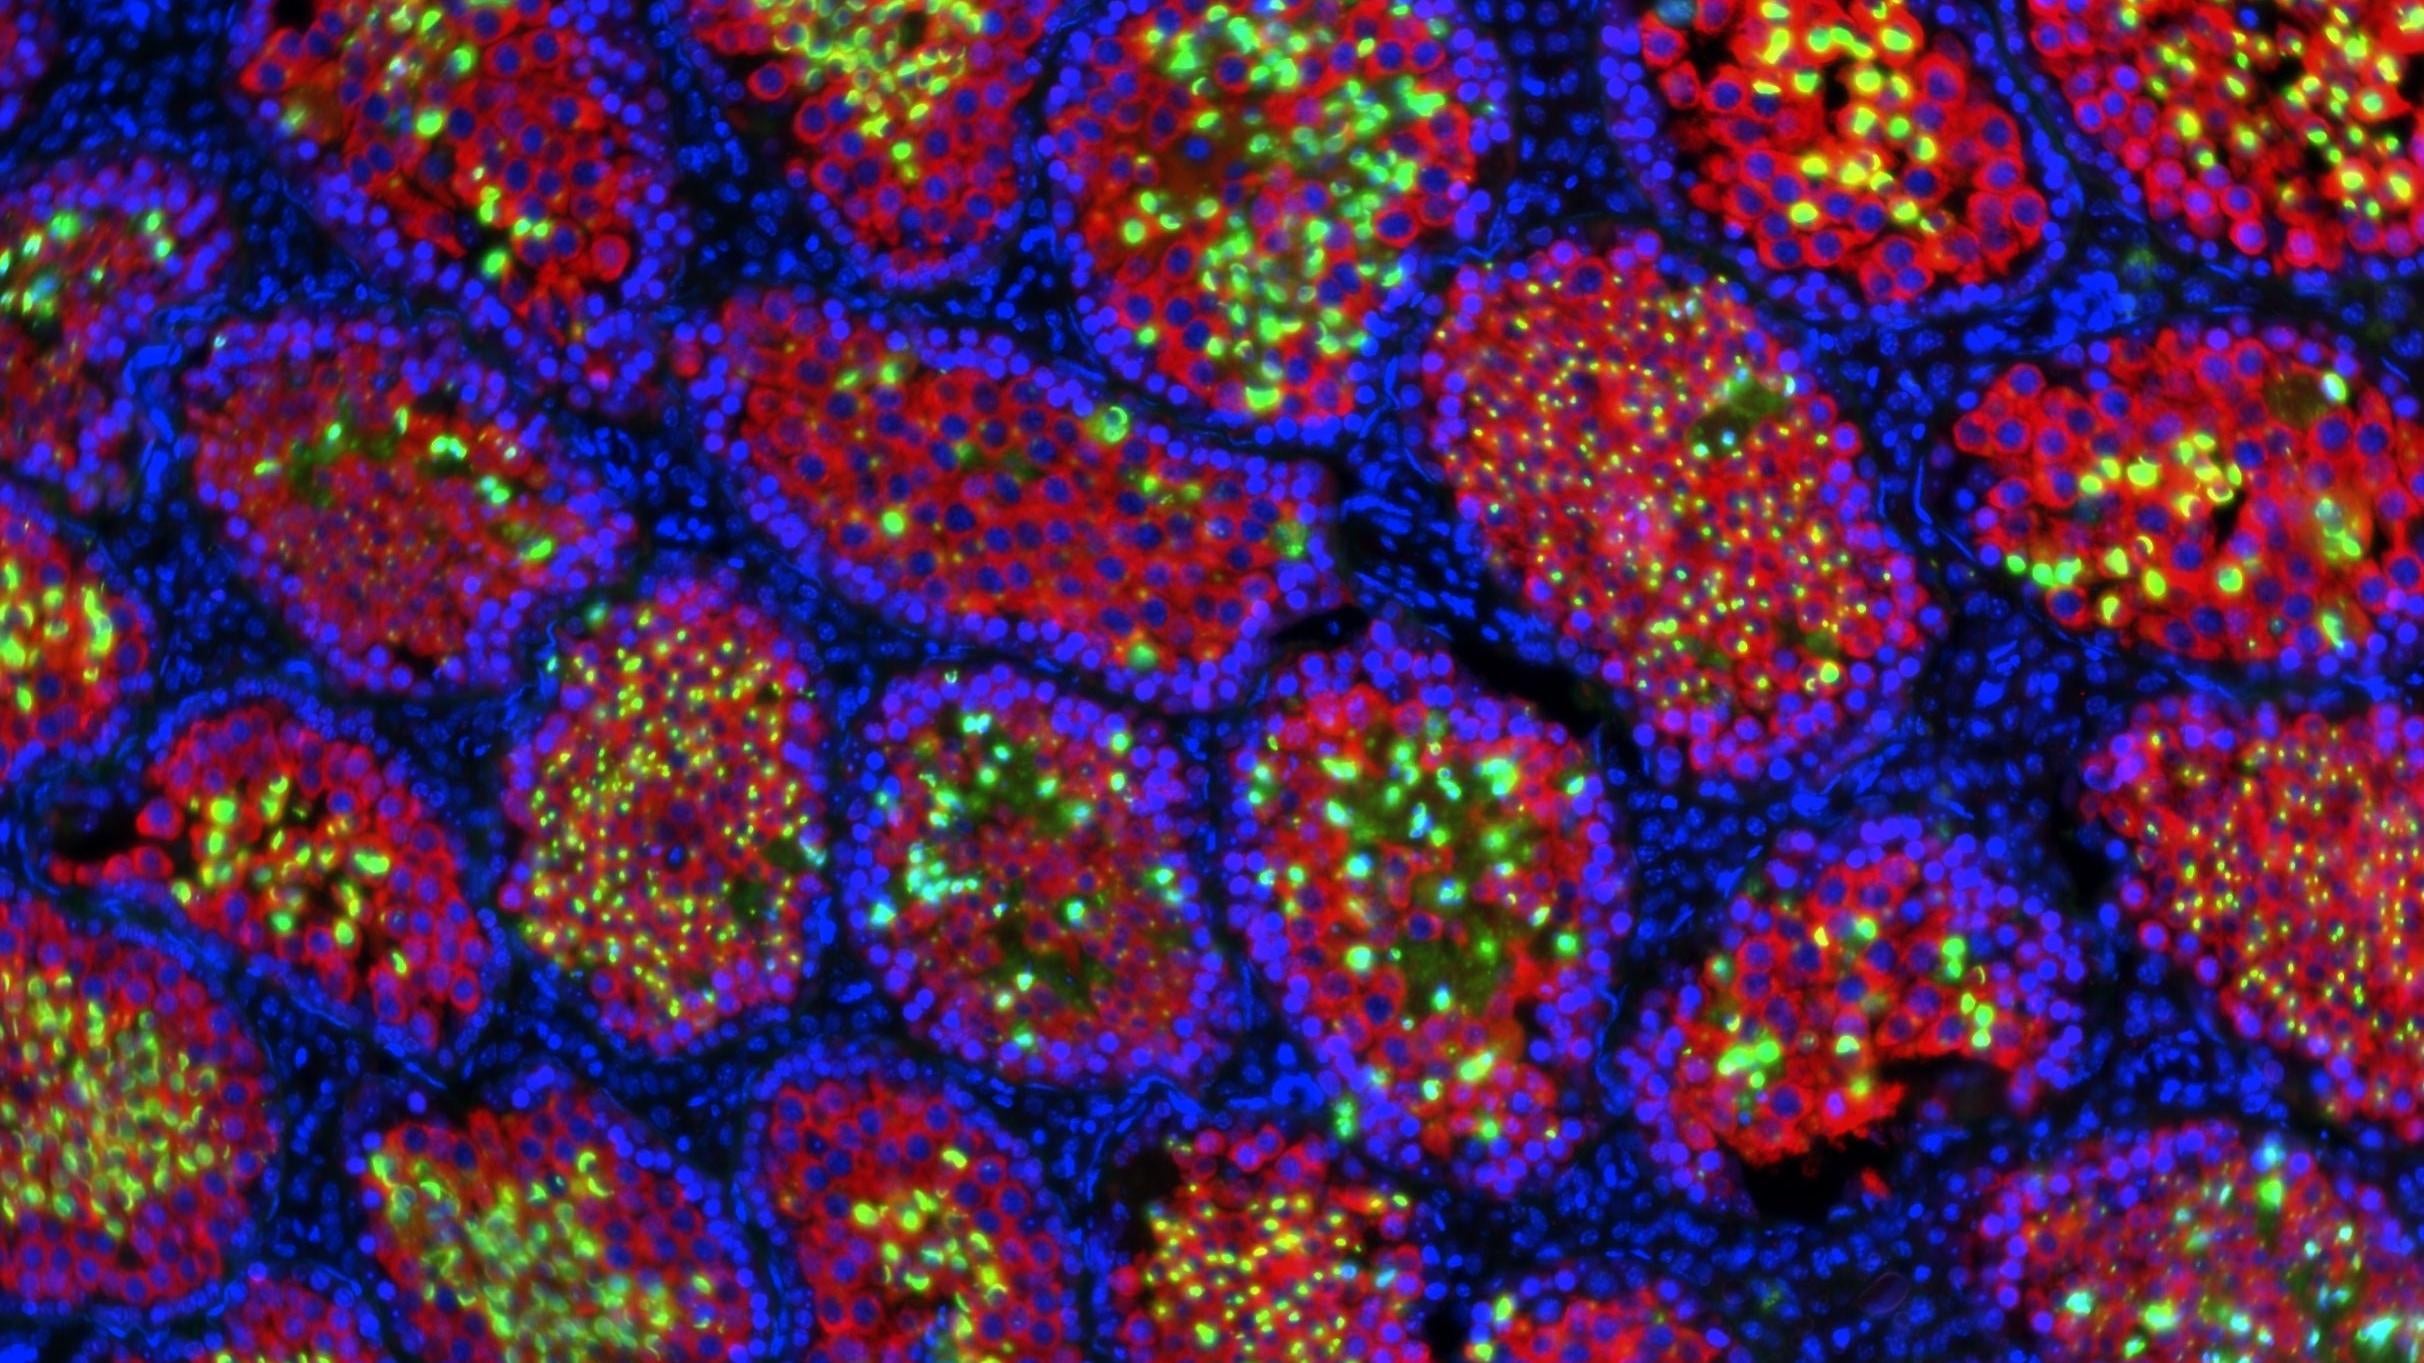 The testes of the mouse/rat hybrids seen up close using Immunofluorescence staining. The green and red spots mark the presence of sperm-associated proteins that otherwise would have been missing in sterile mice.  (Image: Joel Zvick/ETH Zurich)